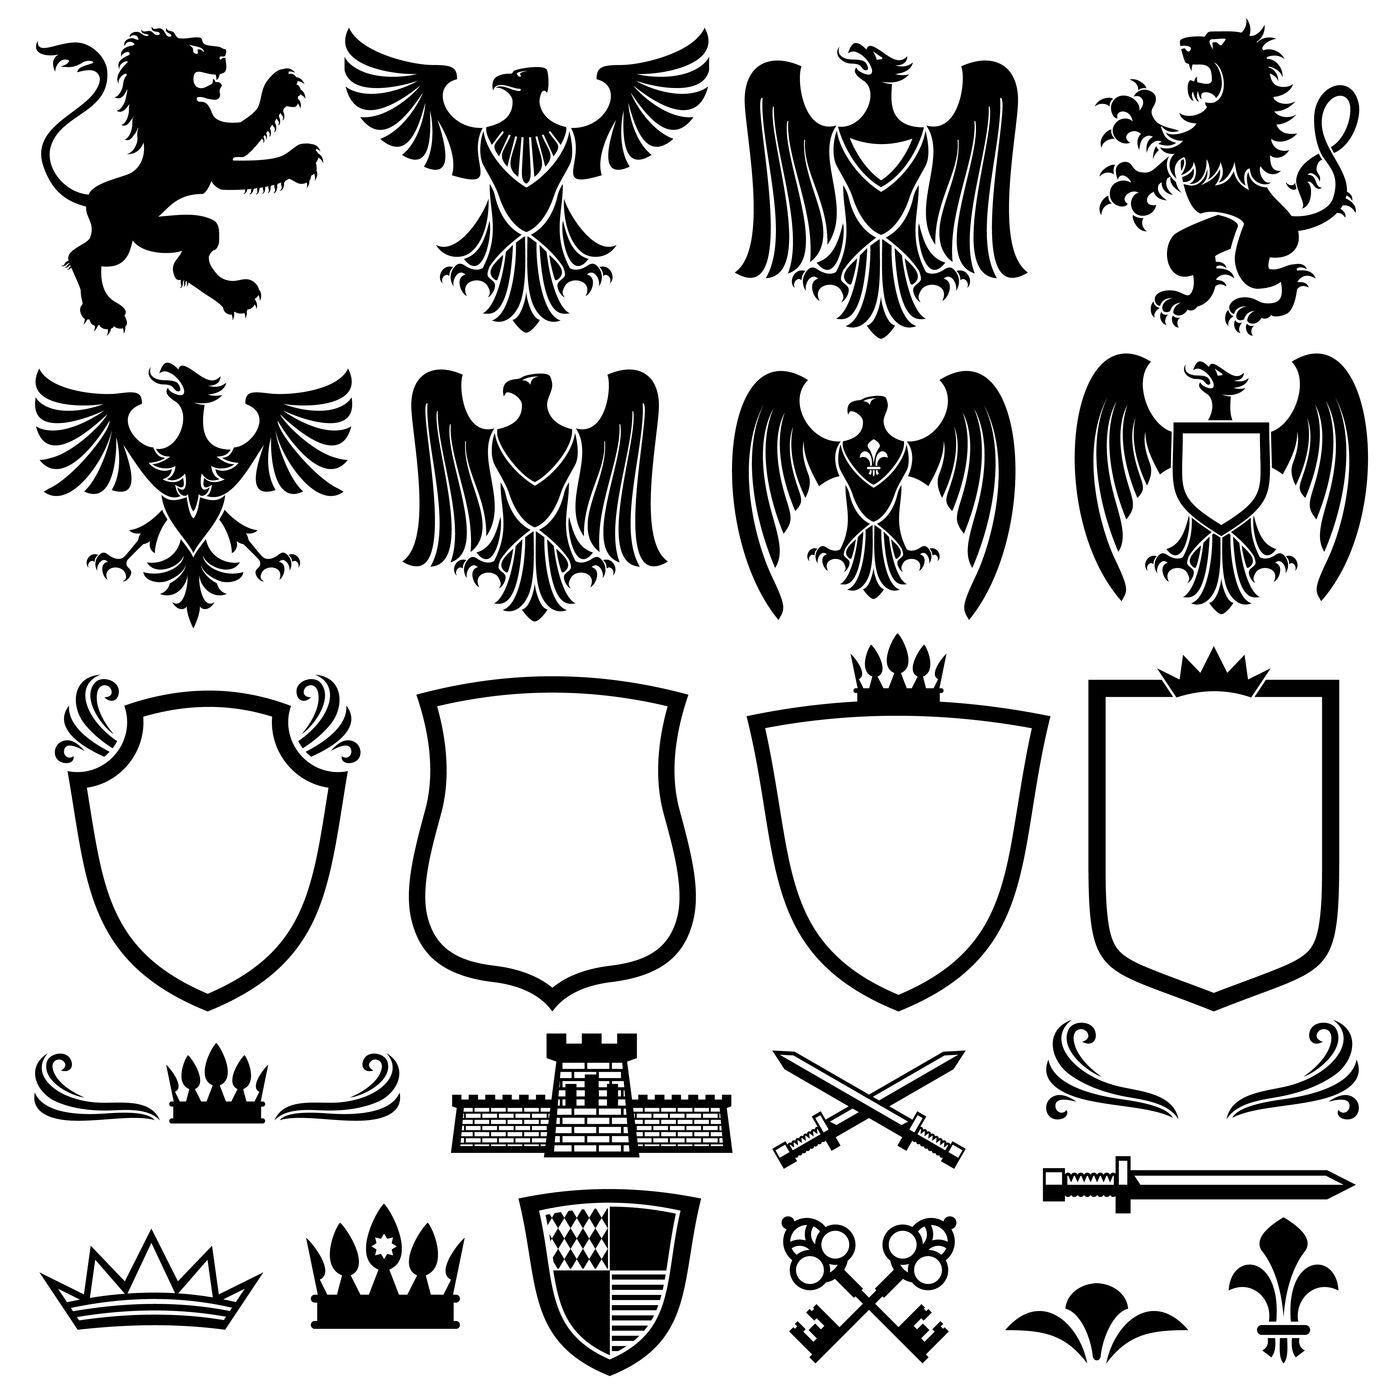 Family coat of arms vector elements for heraldic royal emblems By